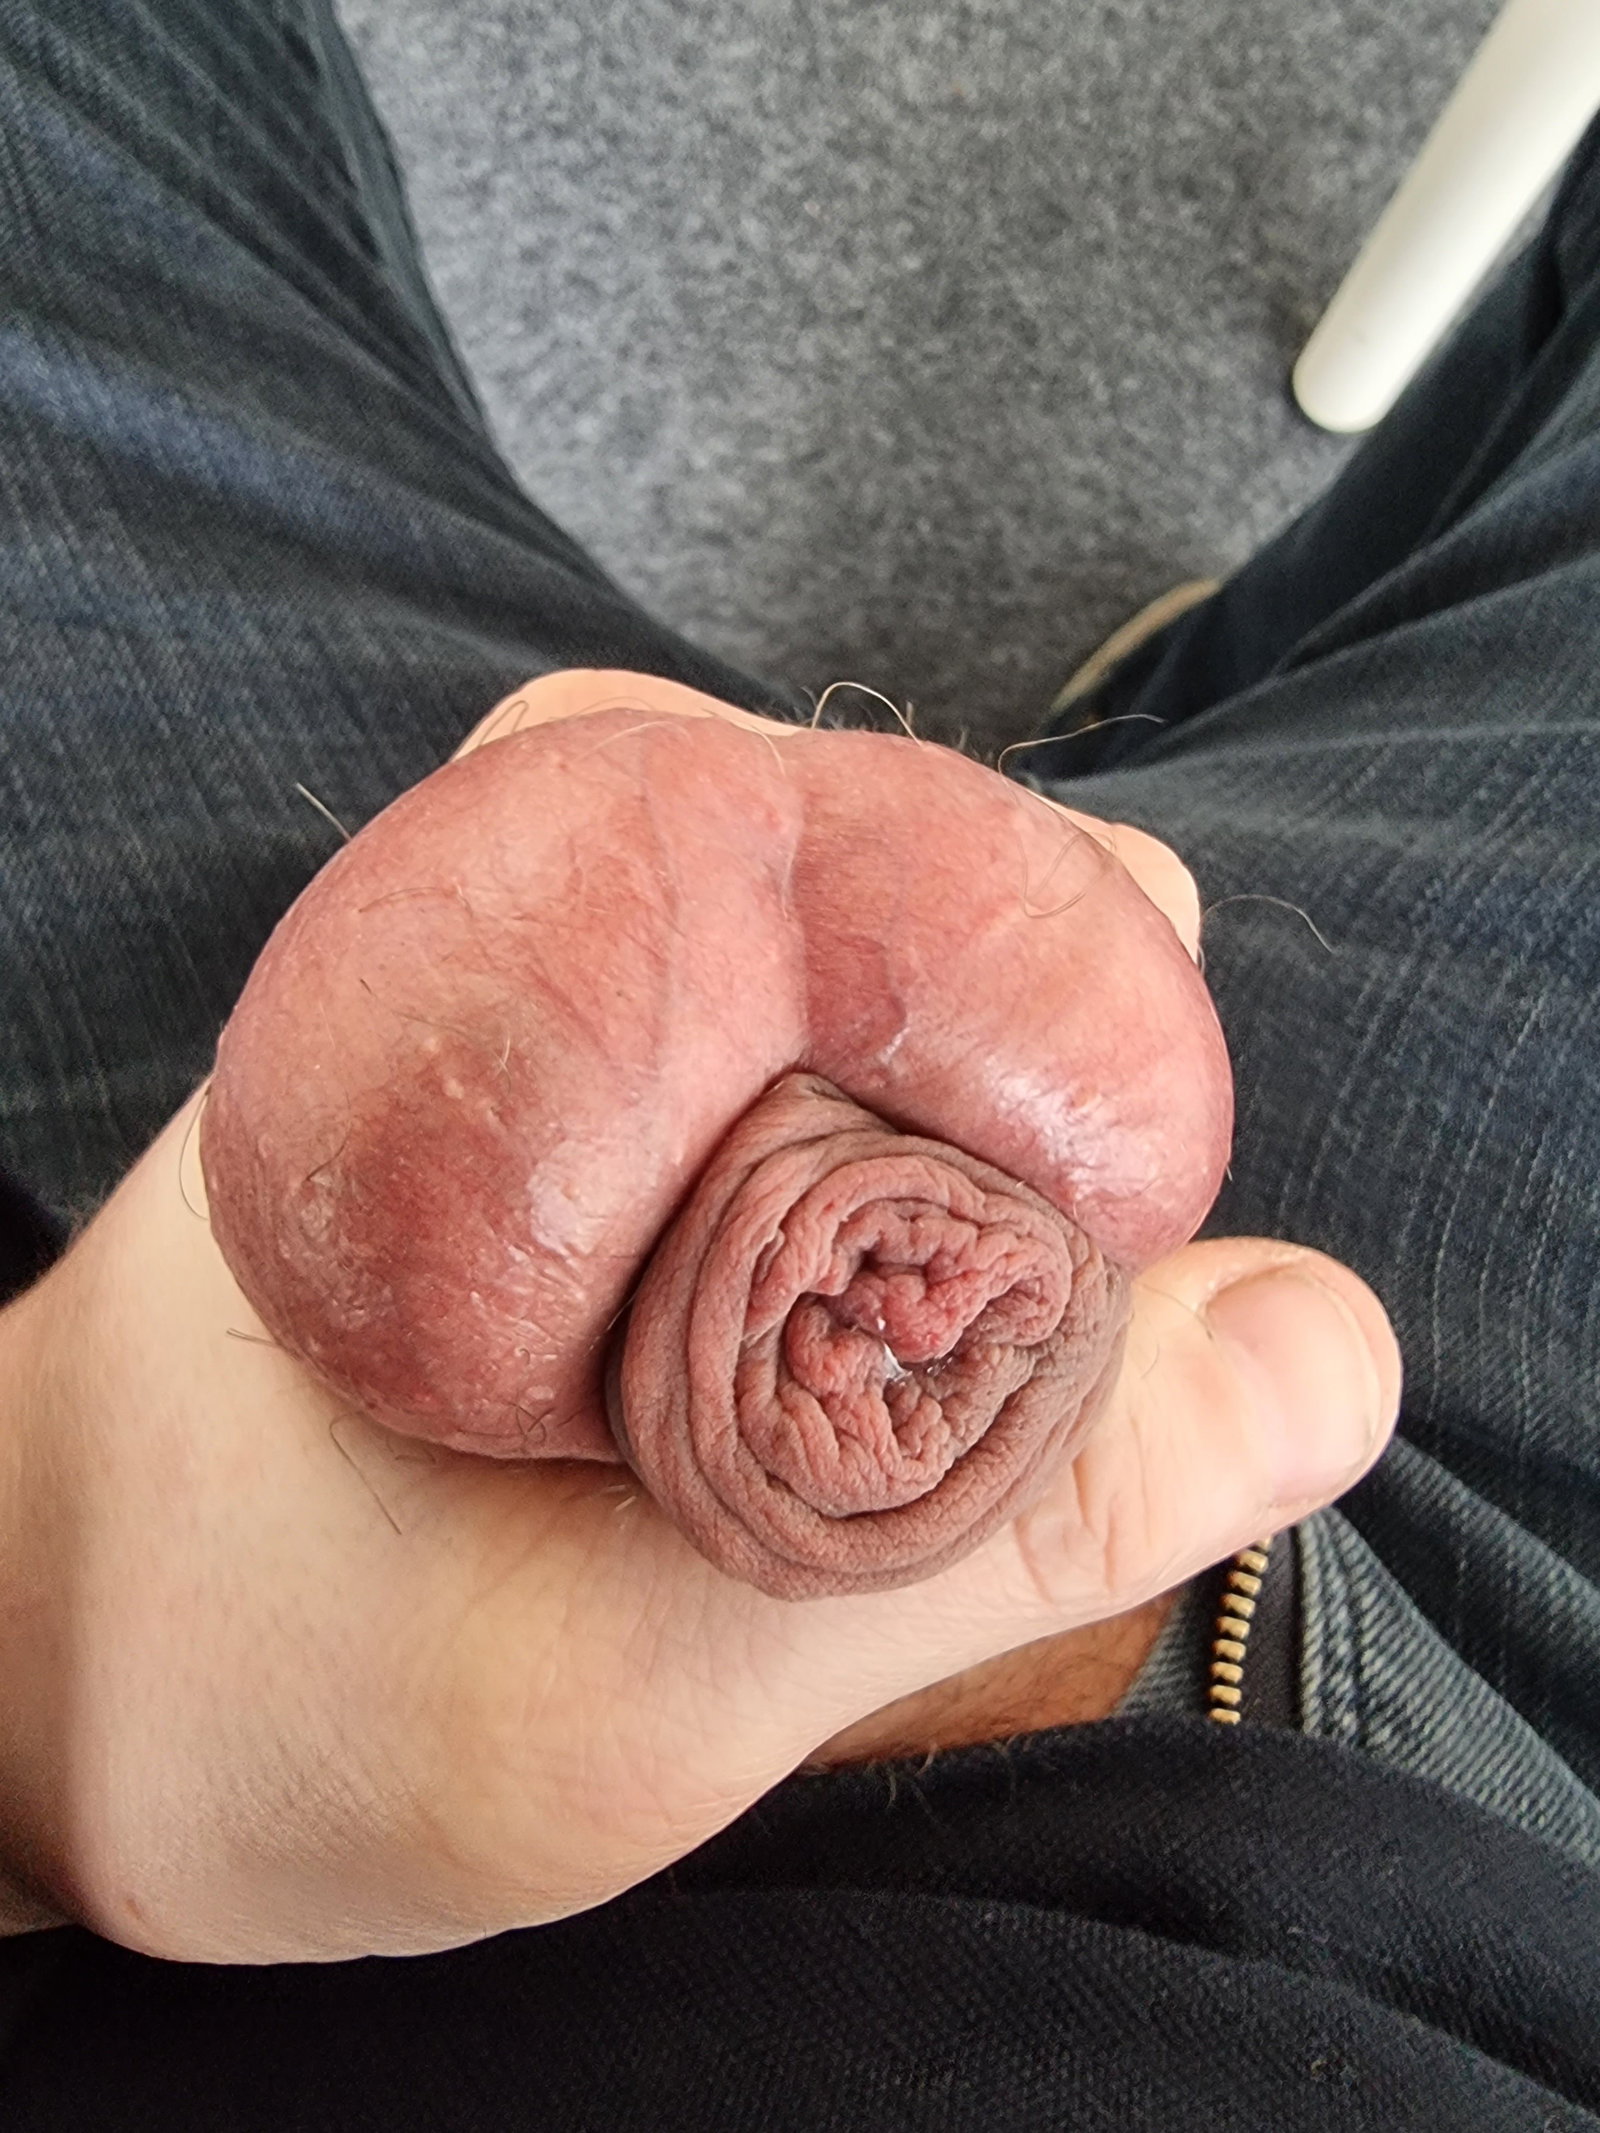 Photo by HabKleinenPenis with the username @HabKleinenPenis, who is a verified user,  October 2, 2022 at 3:45 PM. The post is about the topic Rate my pussy or dick and the text says 'Just a few pics from my tiny soft cock 😏

#smalldick #kleinerpenis #penis #schwul #bi #pansex #smallcock #balls #cockhead #foreskin'